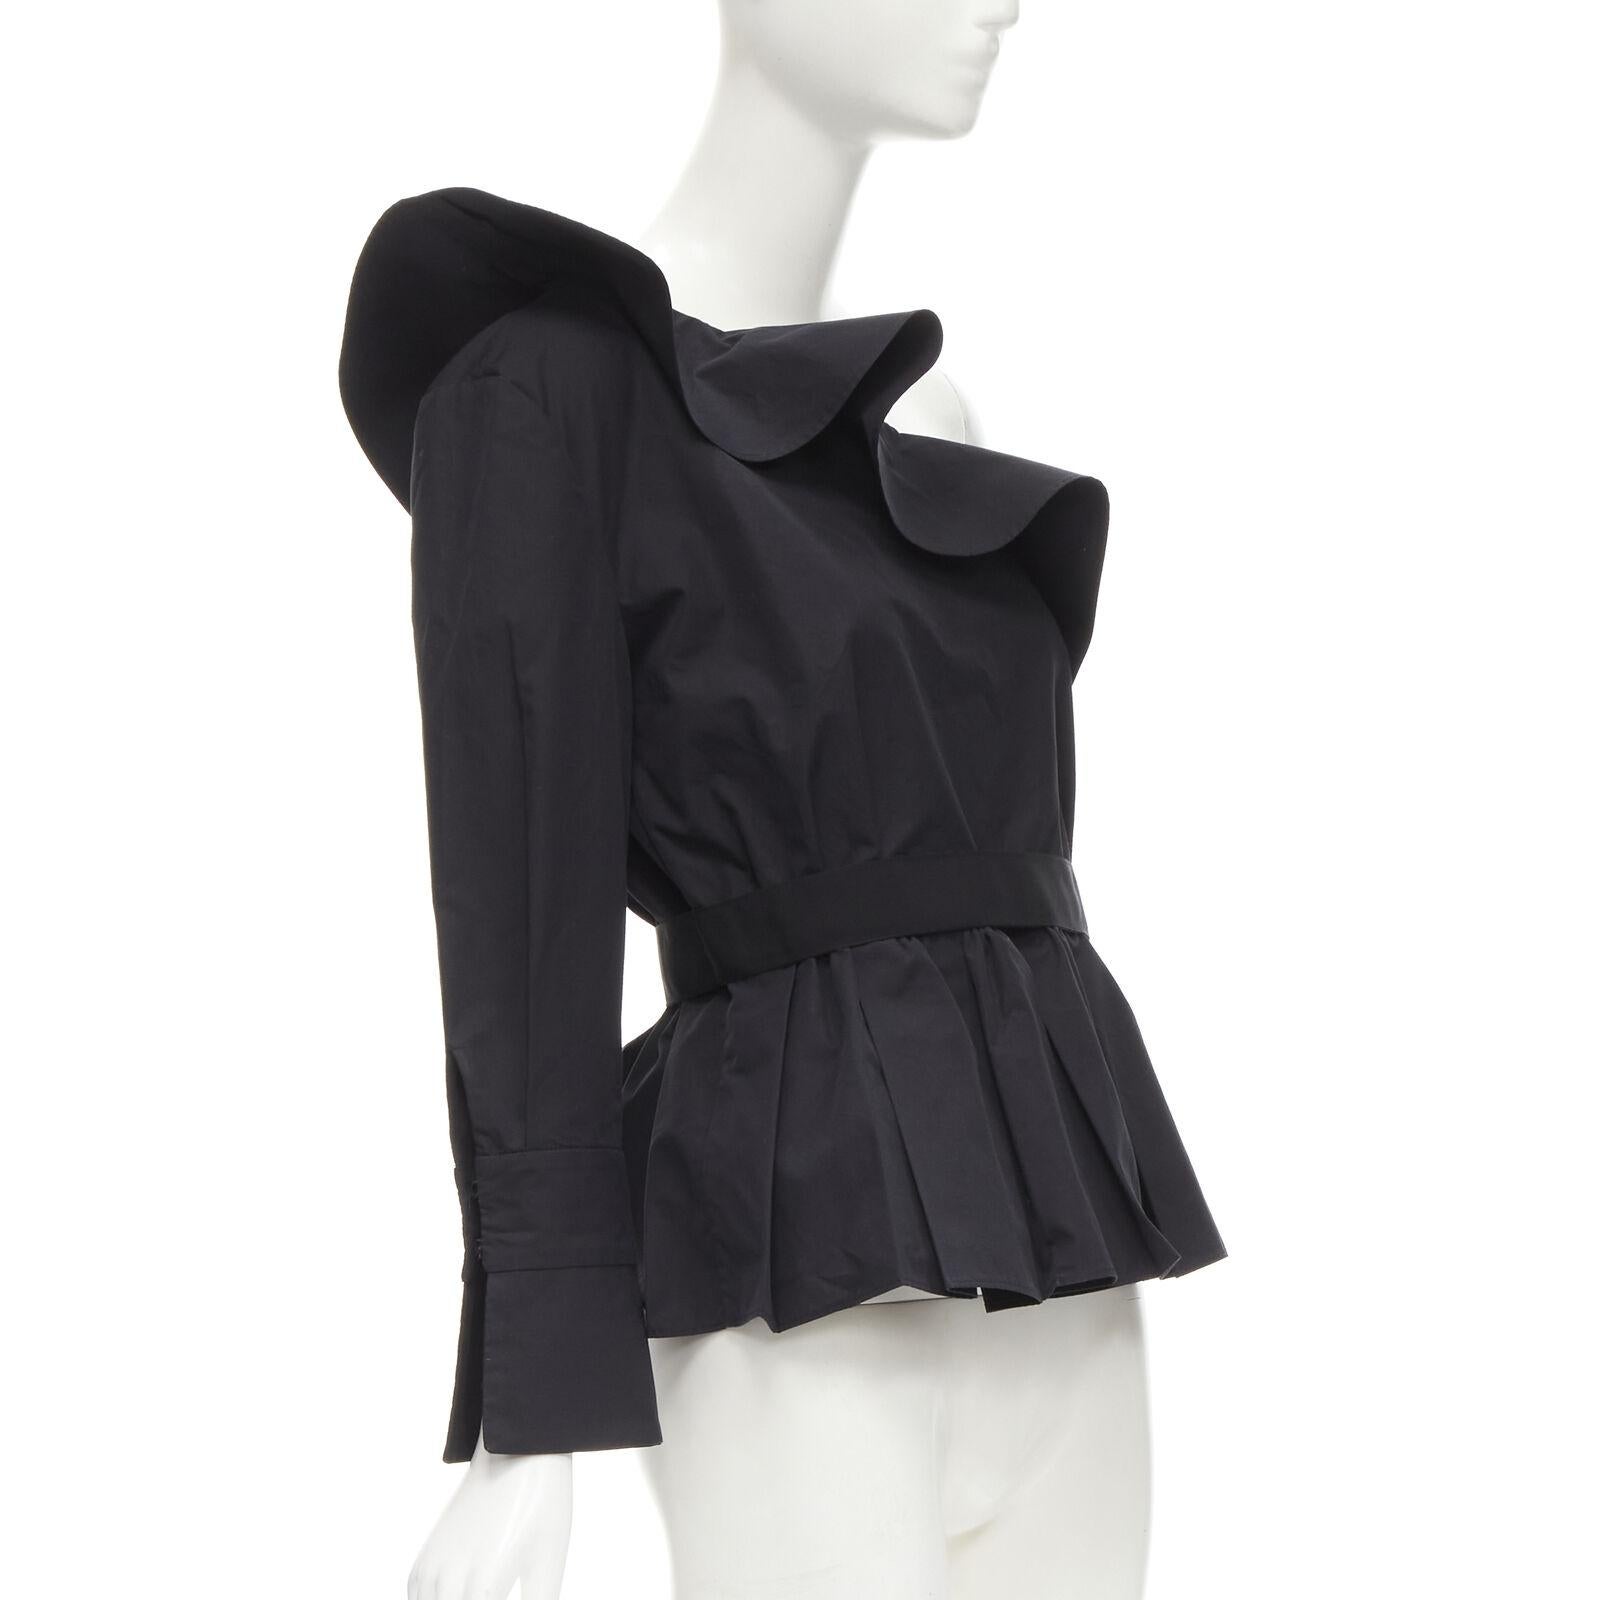 FENDI black cotton ruffle one shoulder belted peplum top IT42 M
Reference: KNLM/A00001
Brand: Fendi
Material: Cotton
Color: Black
Pattern: Solid
Closure: Zip
Lining: Unlined
Extra Details: Detachable snap button grosgrain belt.
Made in: